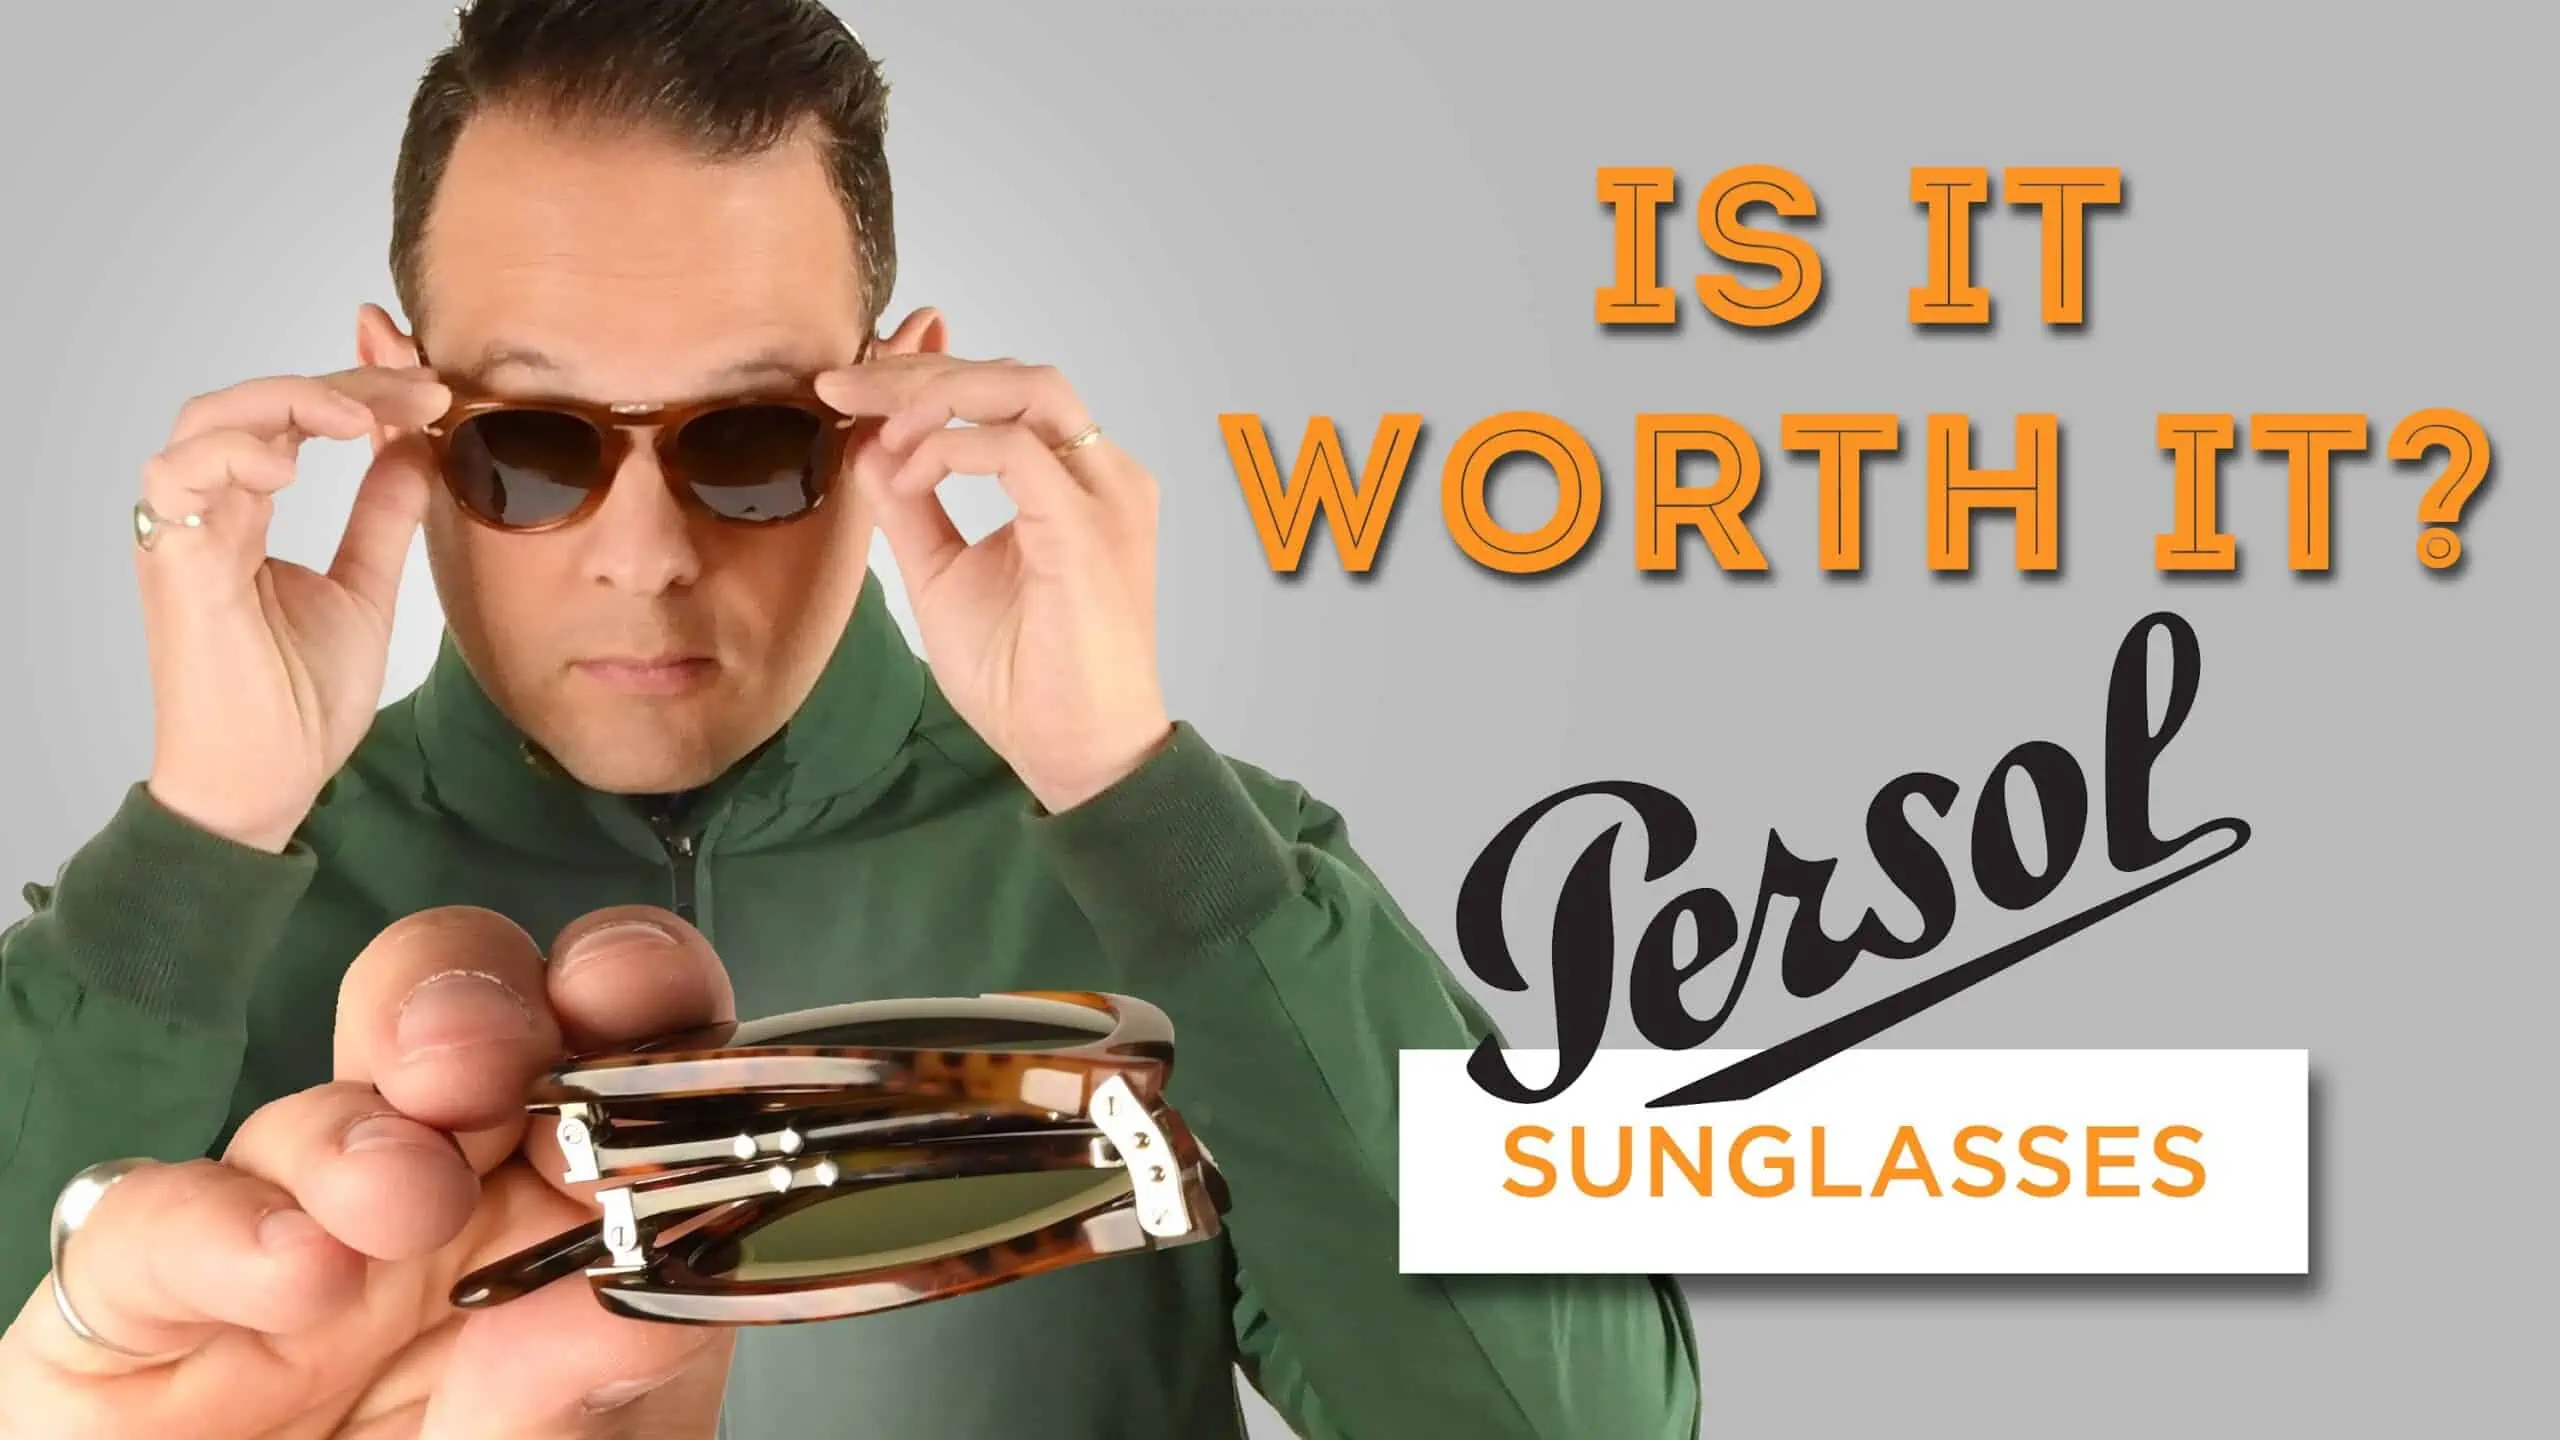 Watch This Before You Buy Persol Sunglasses - YouTube